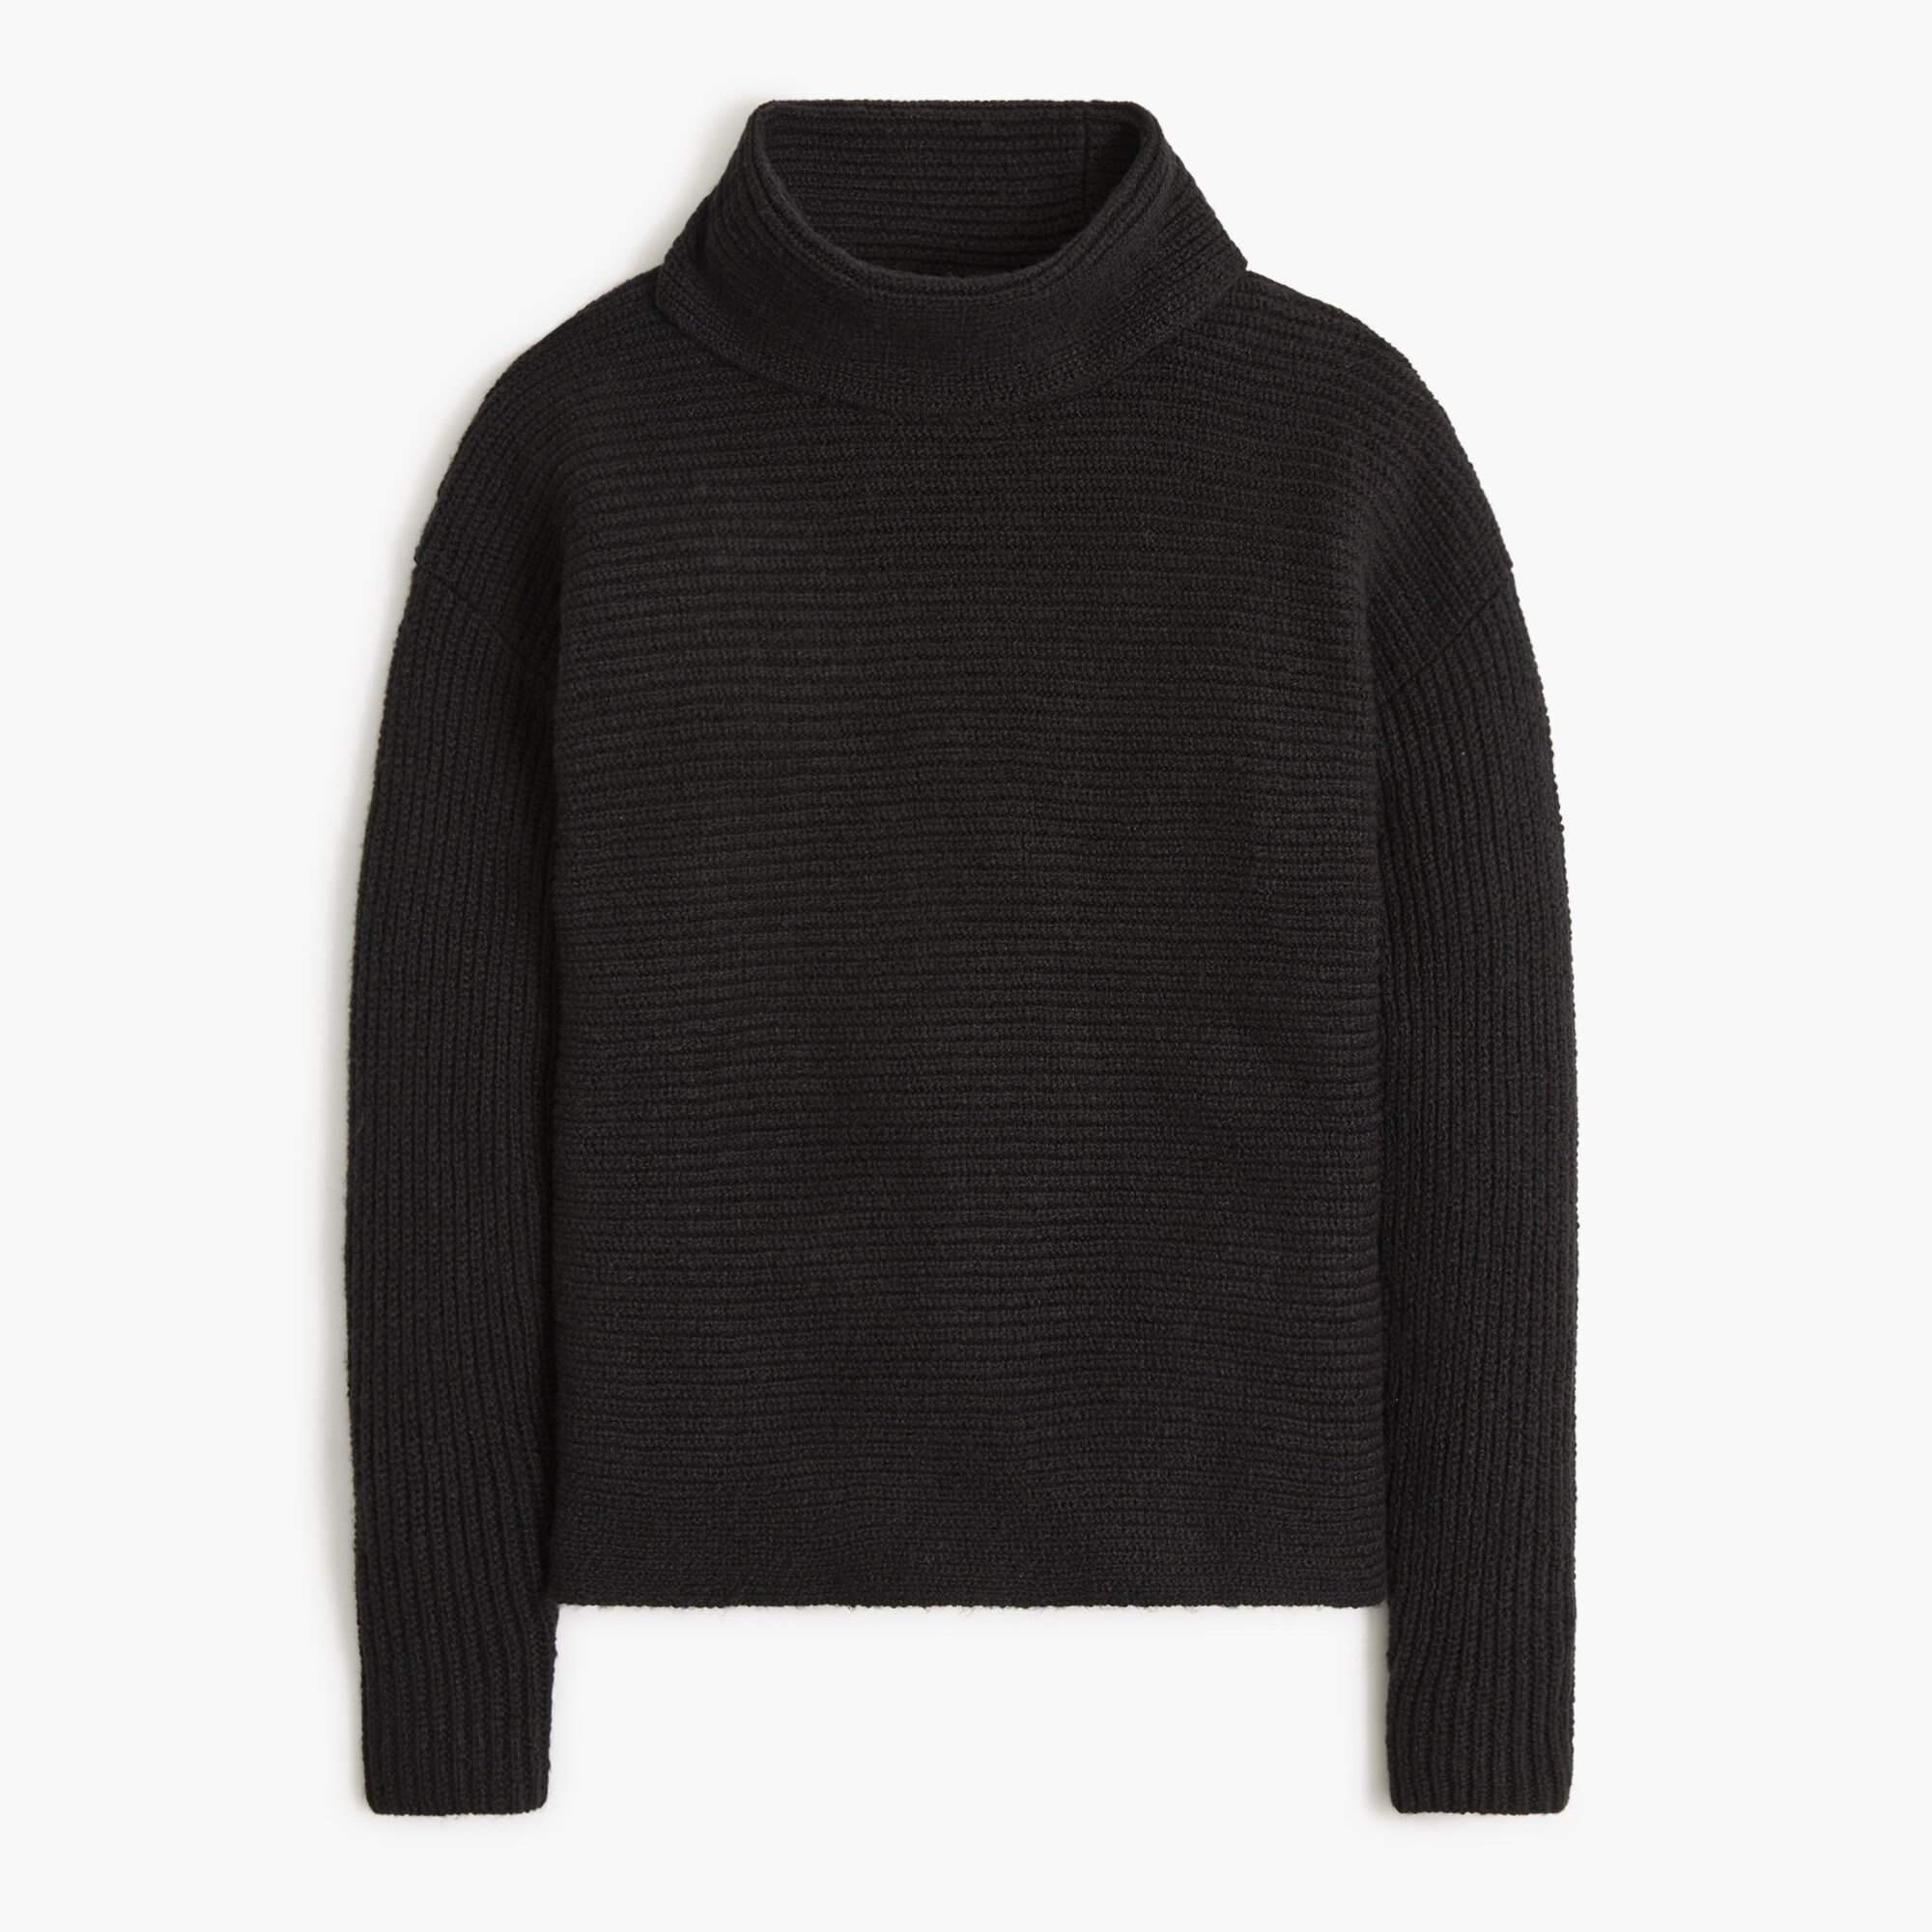  Cowlneck sweater